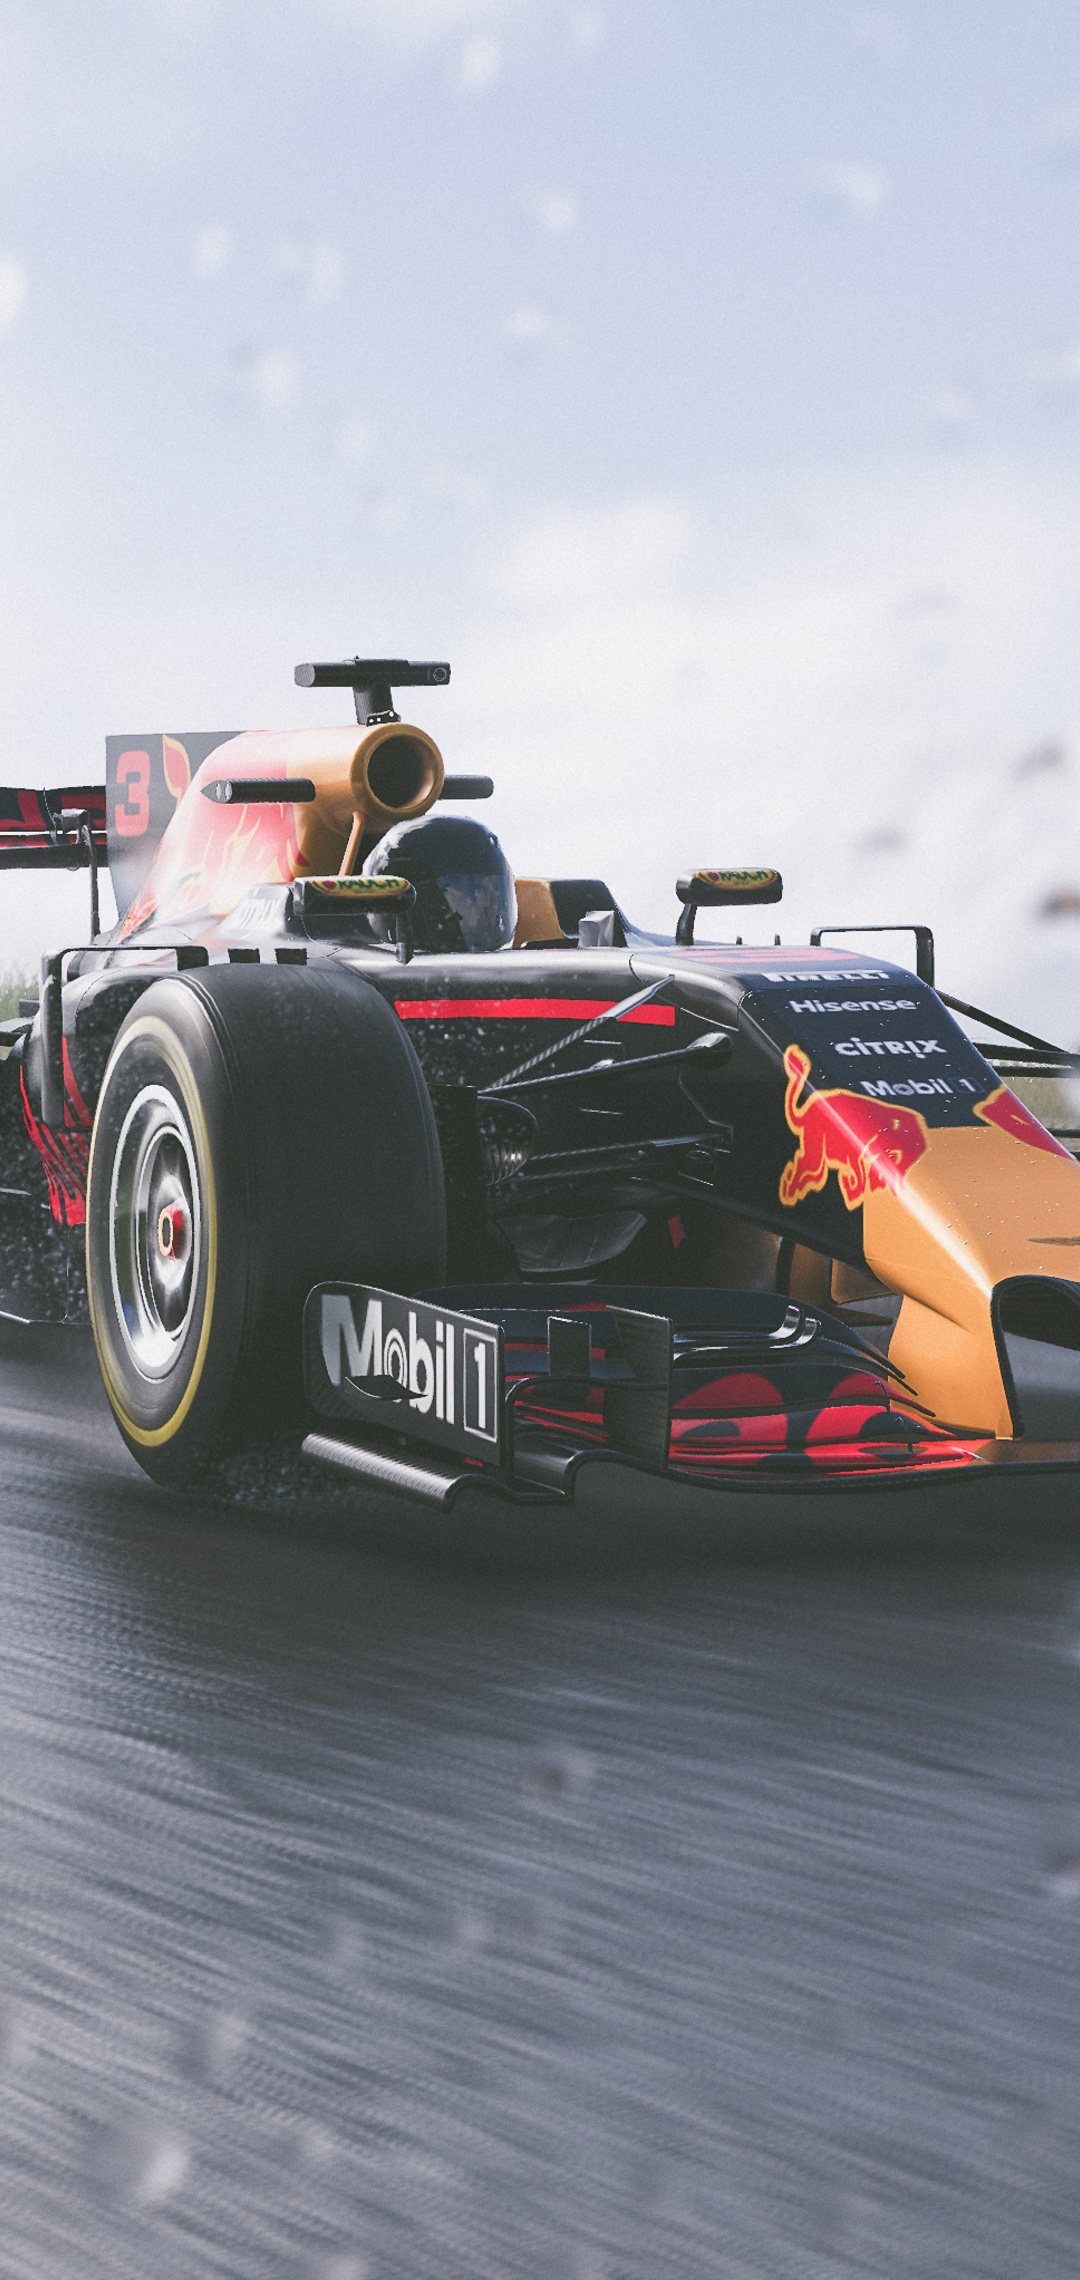 1080x2280 The Crew 2 Red Bull F1 Car 4k One Plus 6 Huawei P Honor View 10 Vivo Y85 Oppo F7 Xiaomi Mi Hd 4k Wallpapers Images Backgrounds Photos And Pictures